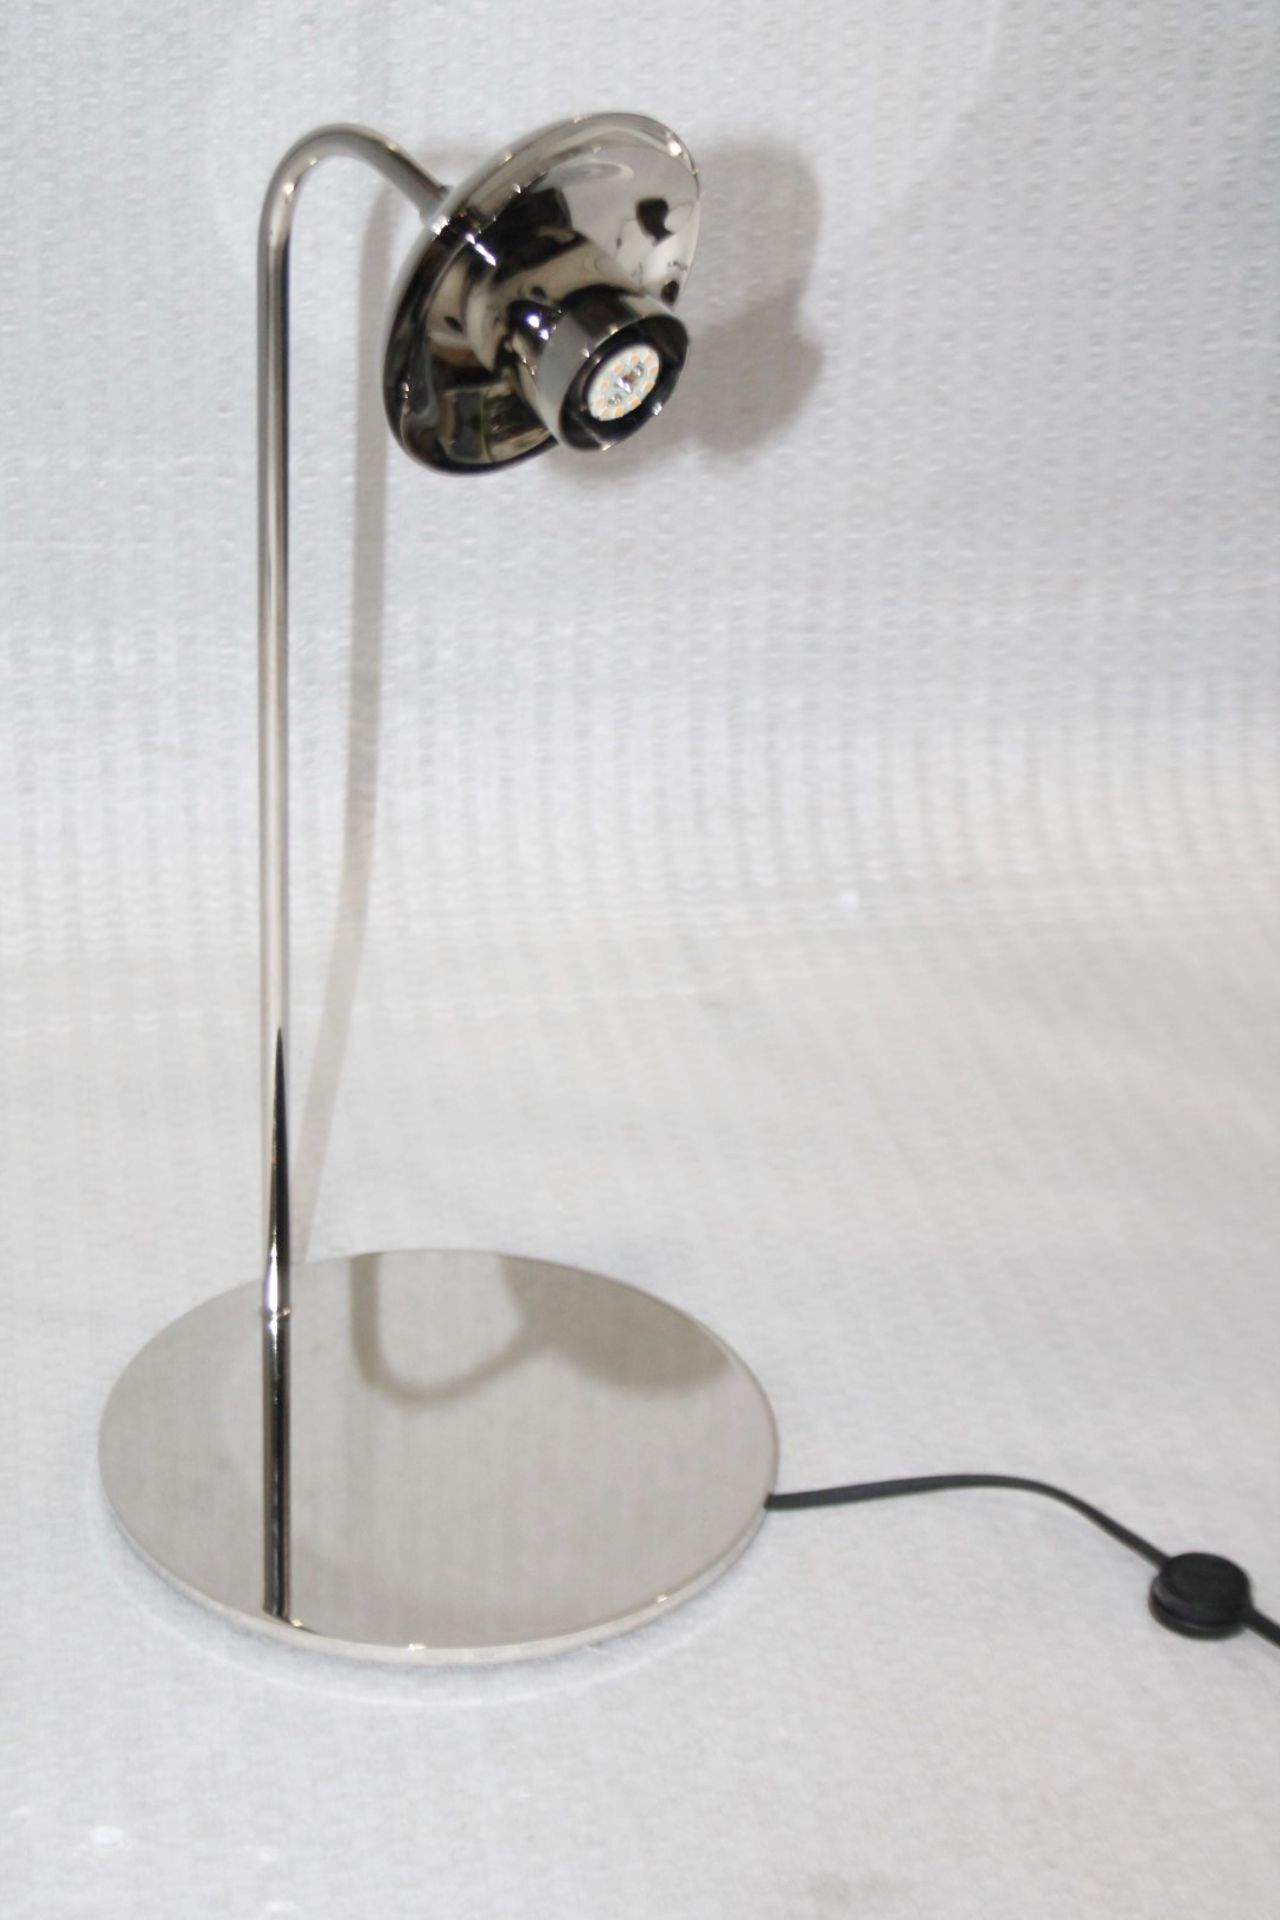 1 x ROLL & HILL 'Modo' Luxury Designer Desk Lamp With A Polished Nickel Finish And Clear Glass Shade - Image 3 of 7